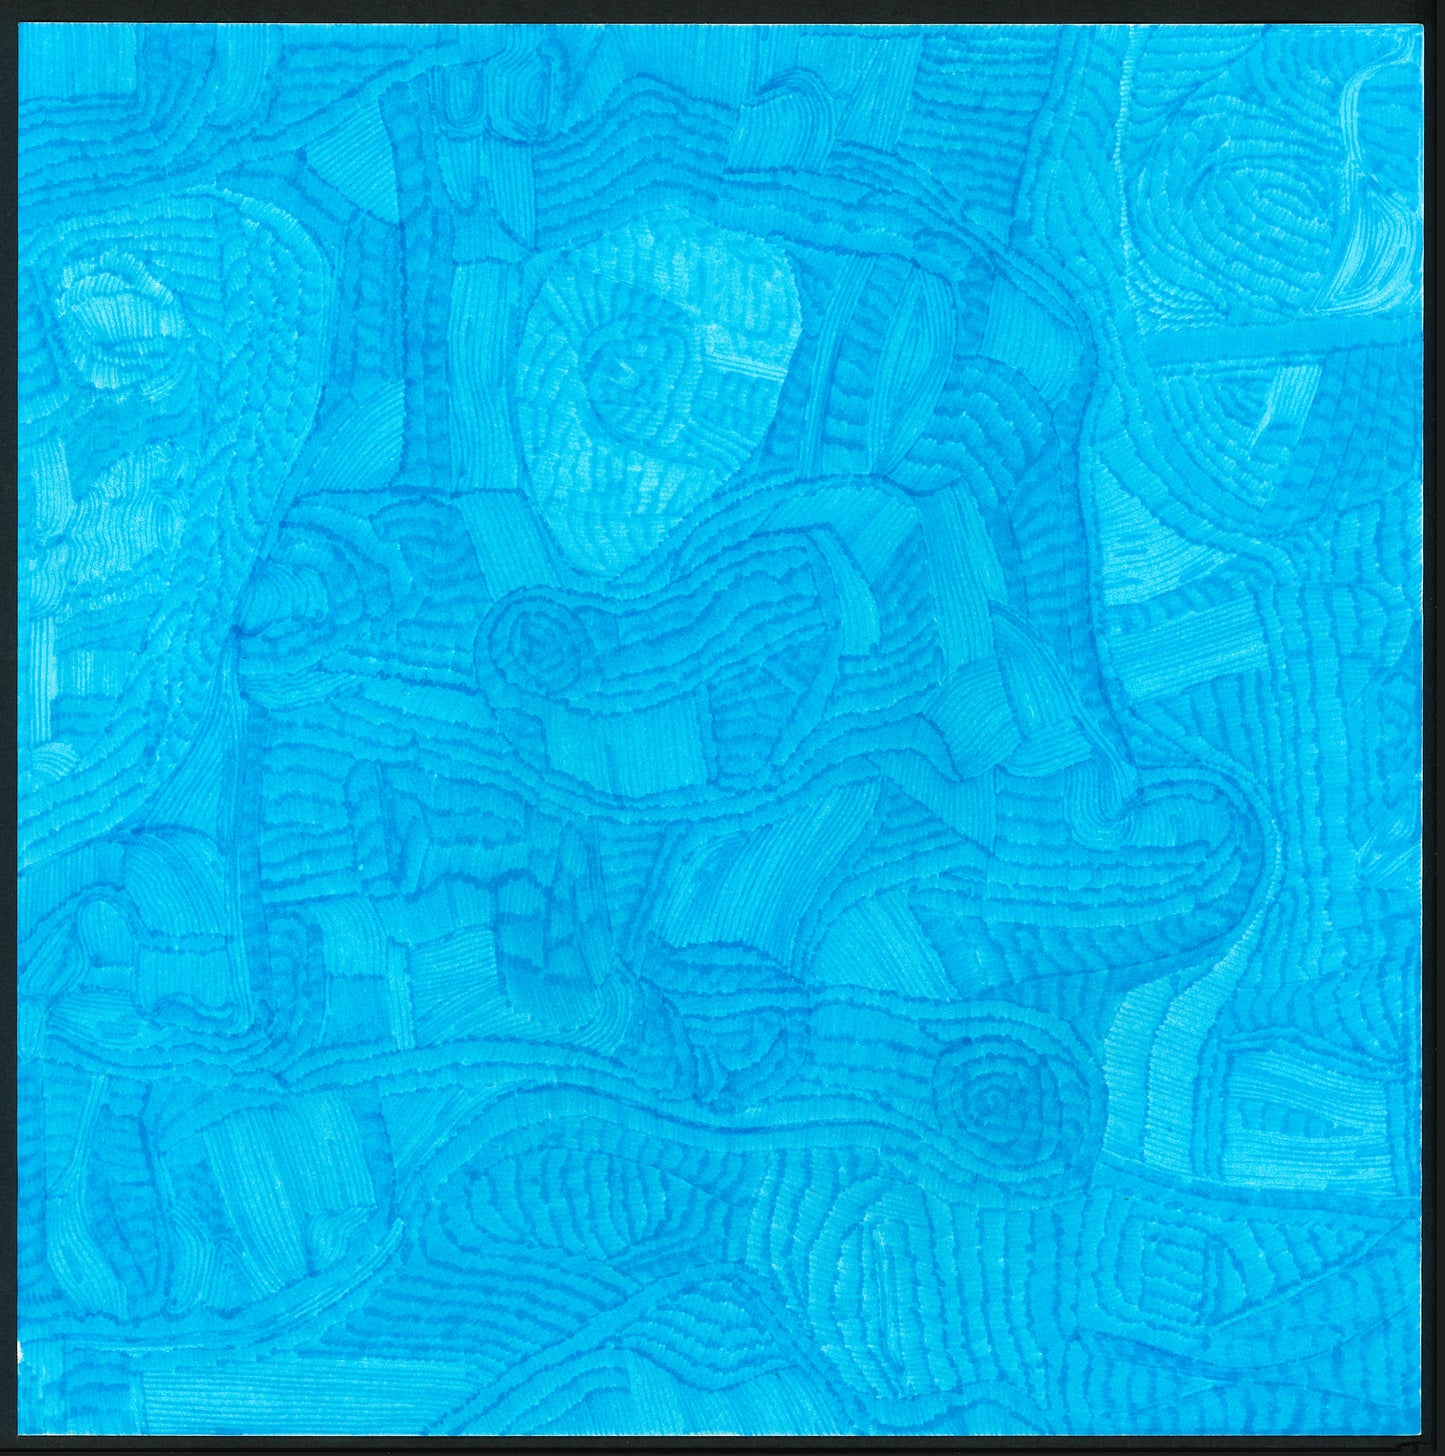 Another Blue Drawing, Also Nice